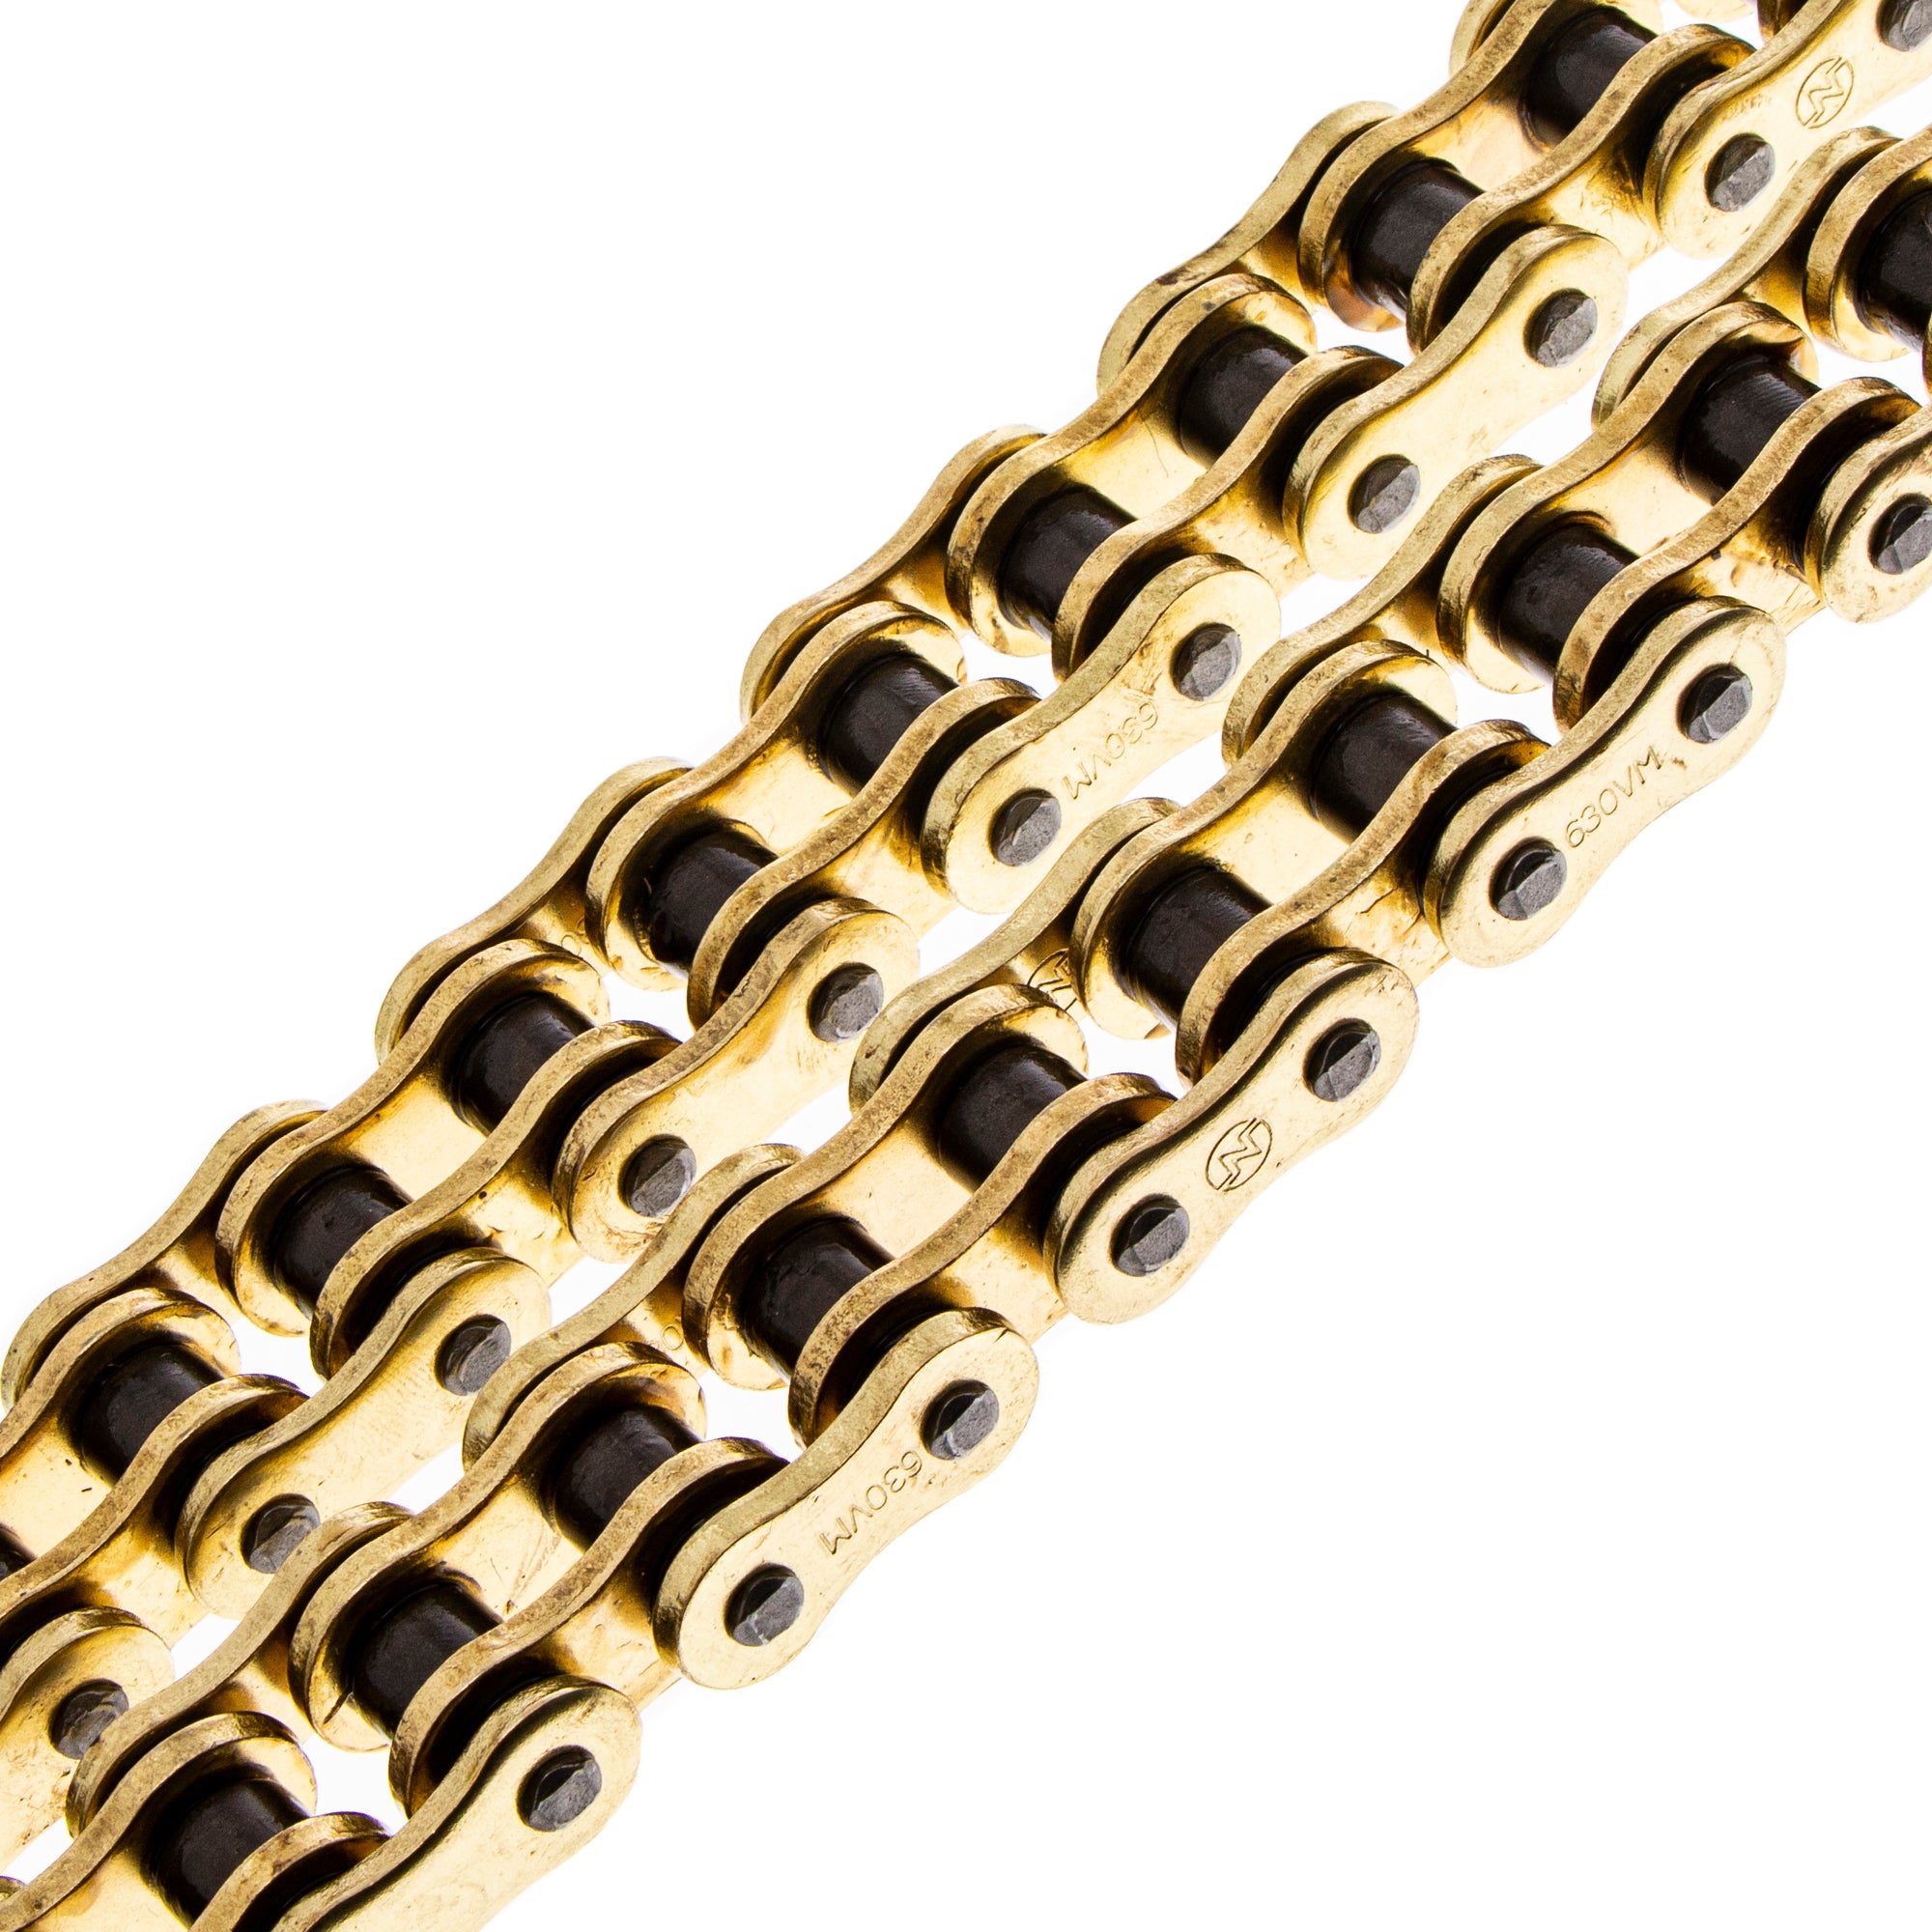 Gold X-Ring Chain 96 w/ Master Link for zOTHER RE5 KZ1000P KZ1000J GS750T 27600-49210 NICHE 519-CDC2584H